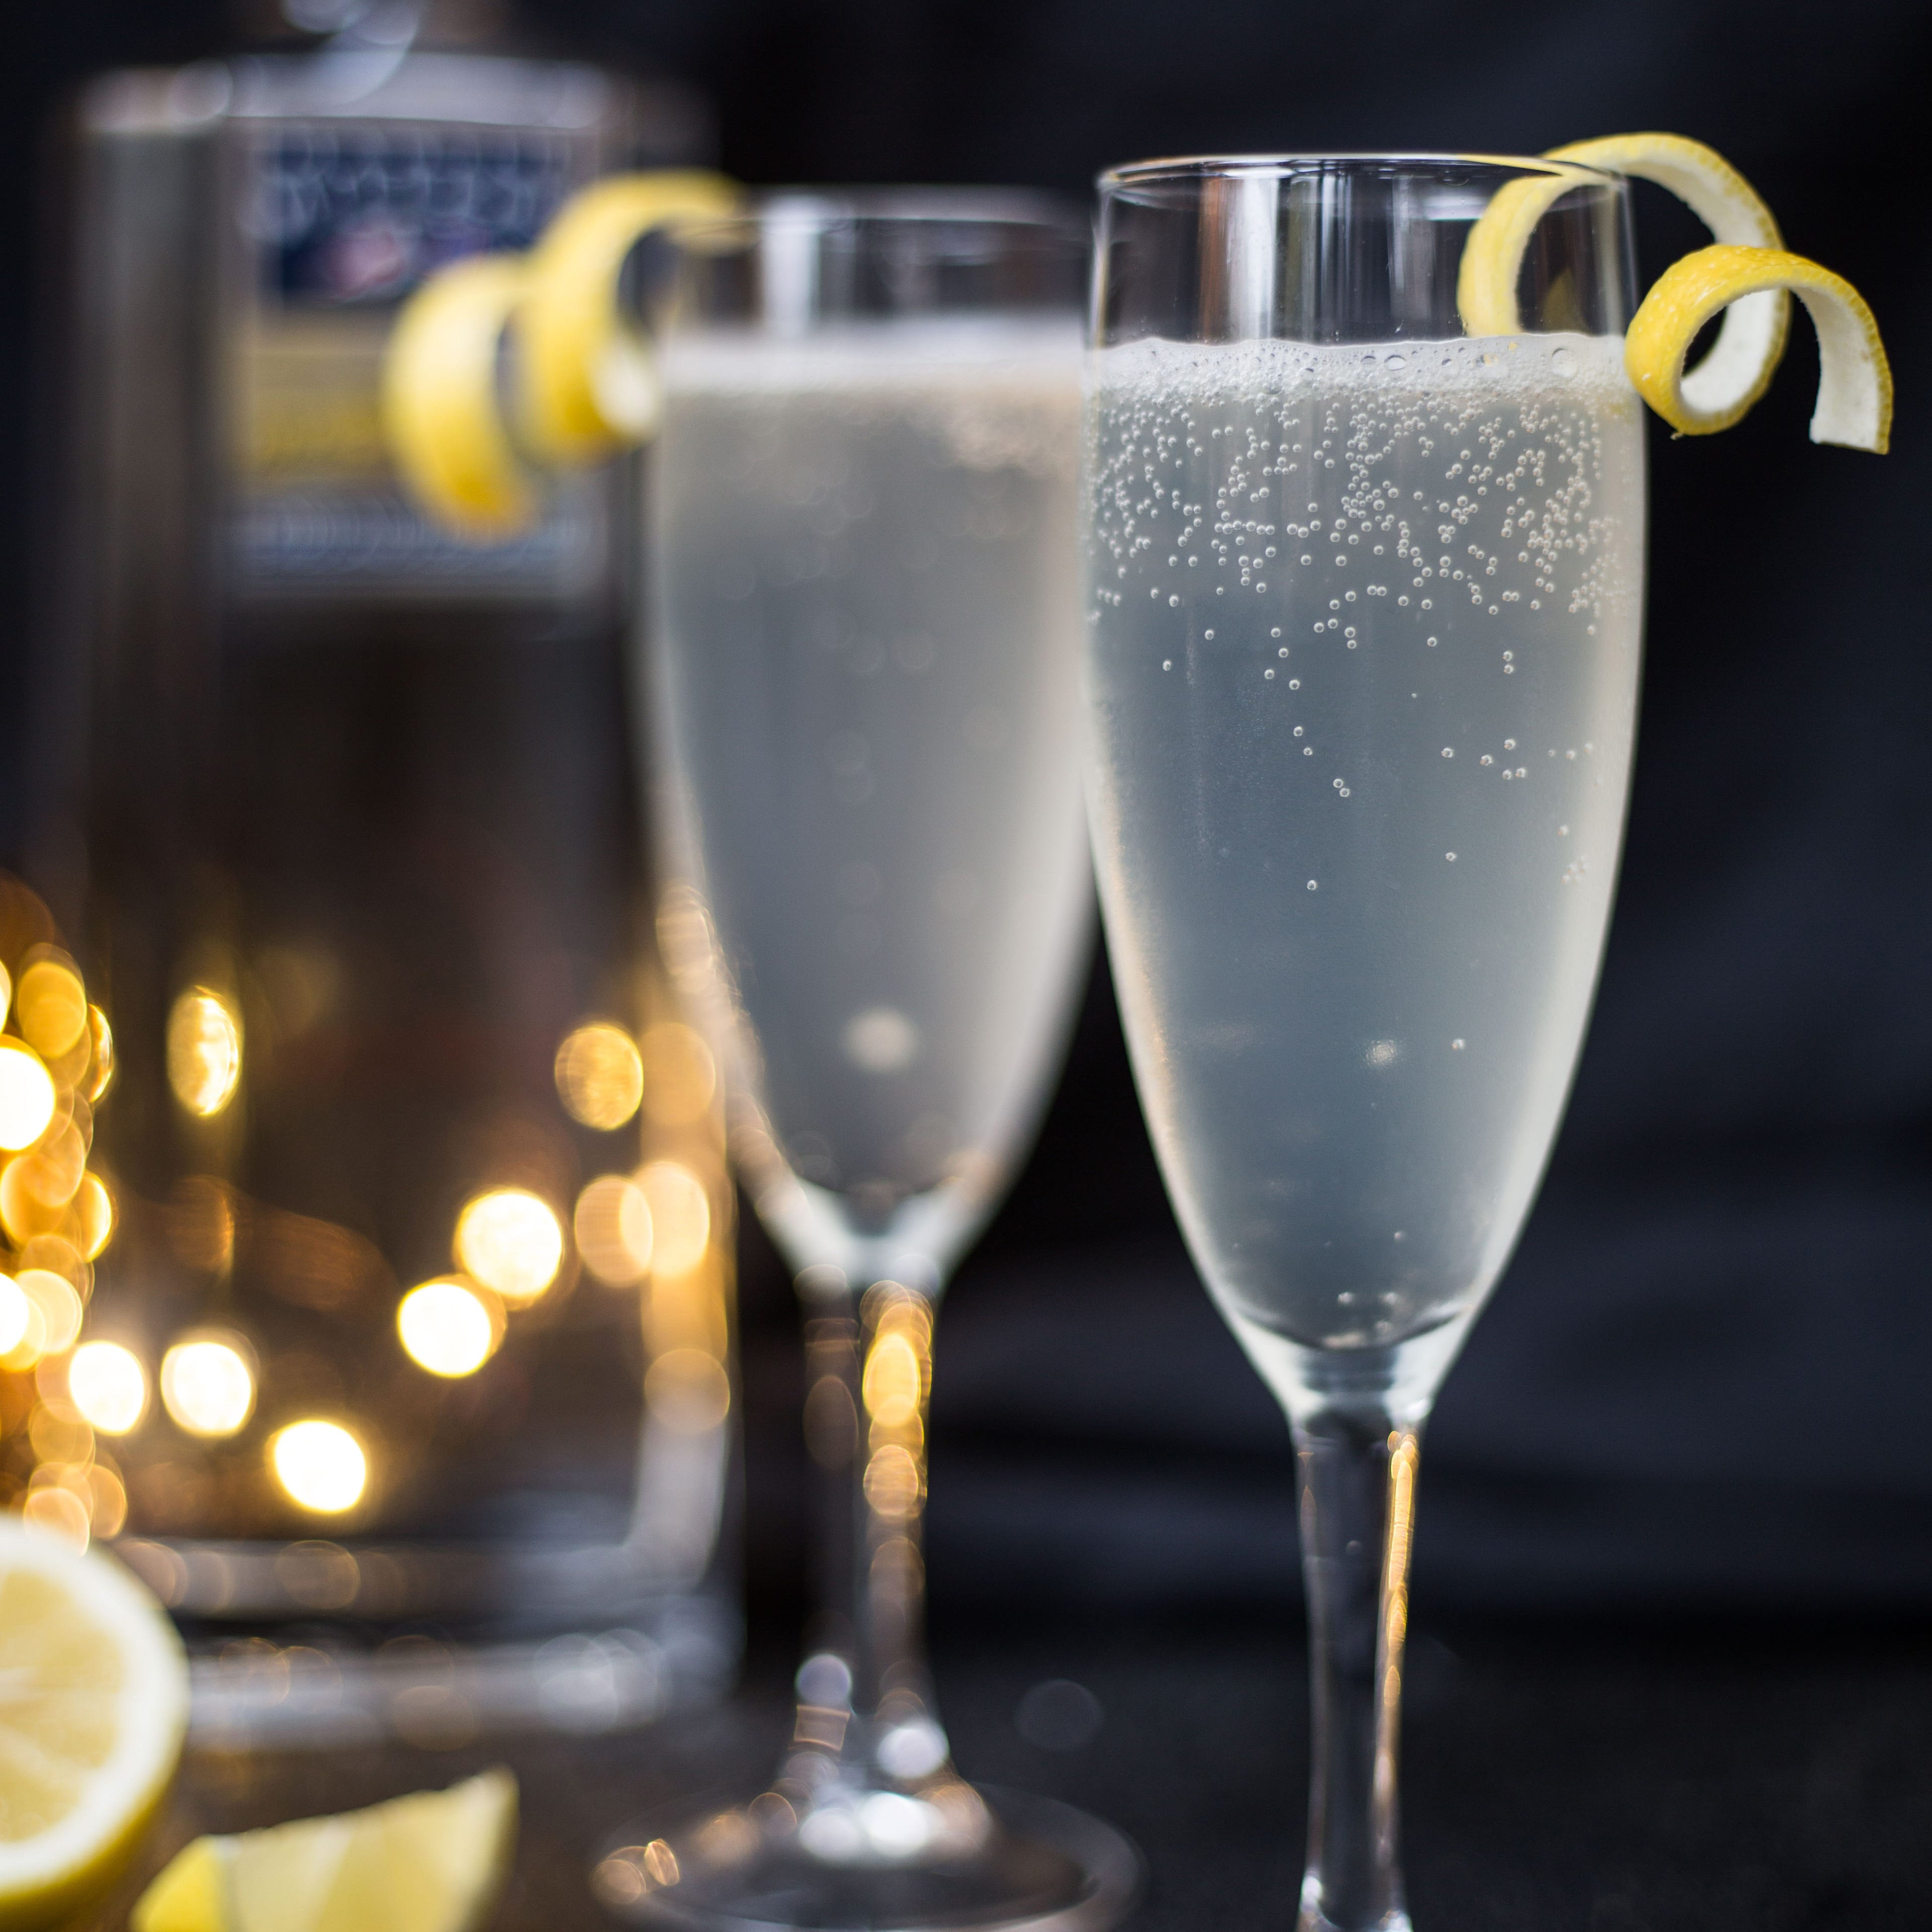 French 75 gin cocktail - classic gin cocktail